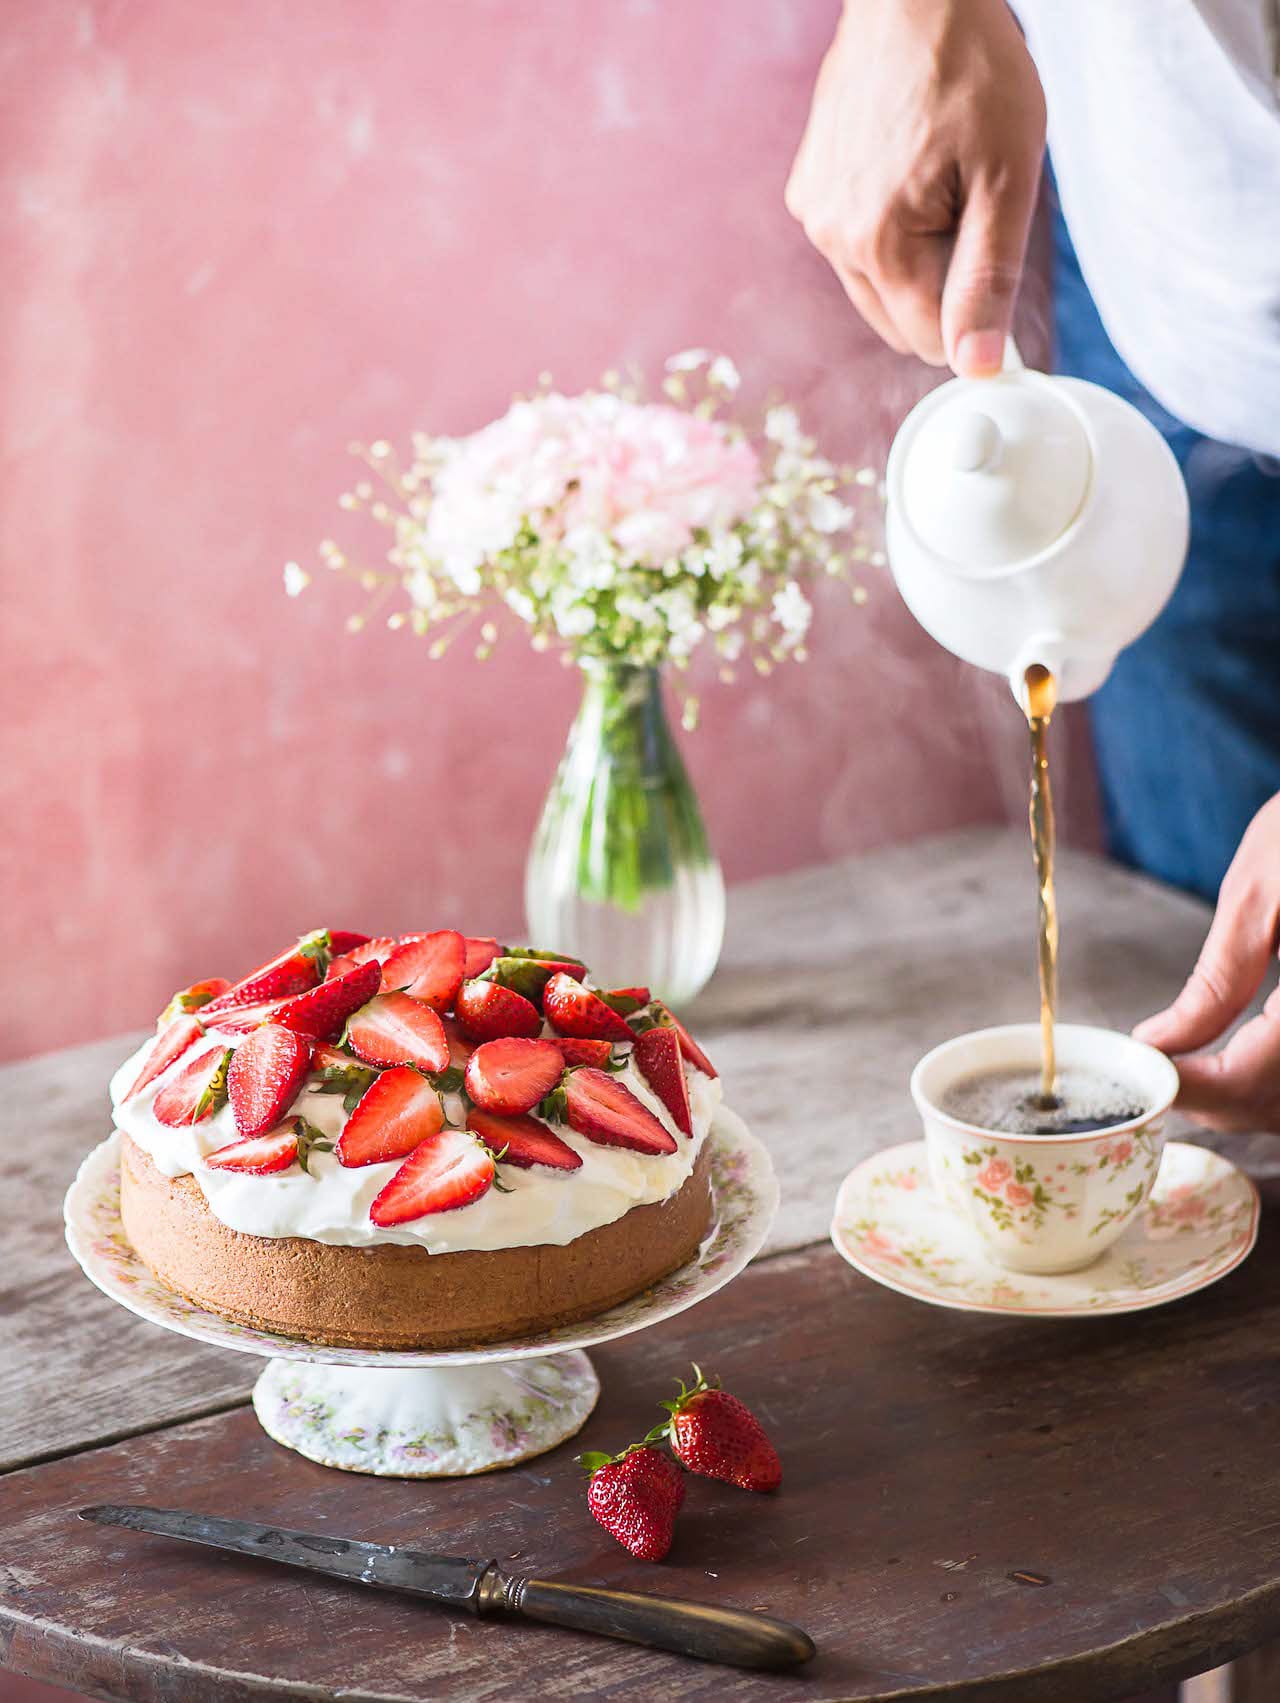 Roasted Almonds Cake With Strawberries & Cream (The White Ramekins) | Playful Cooking